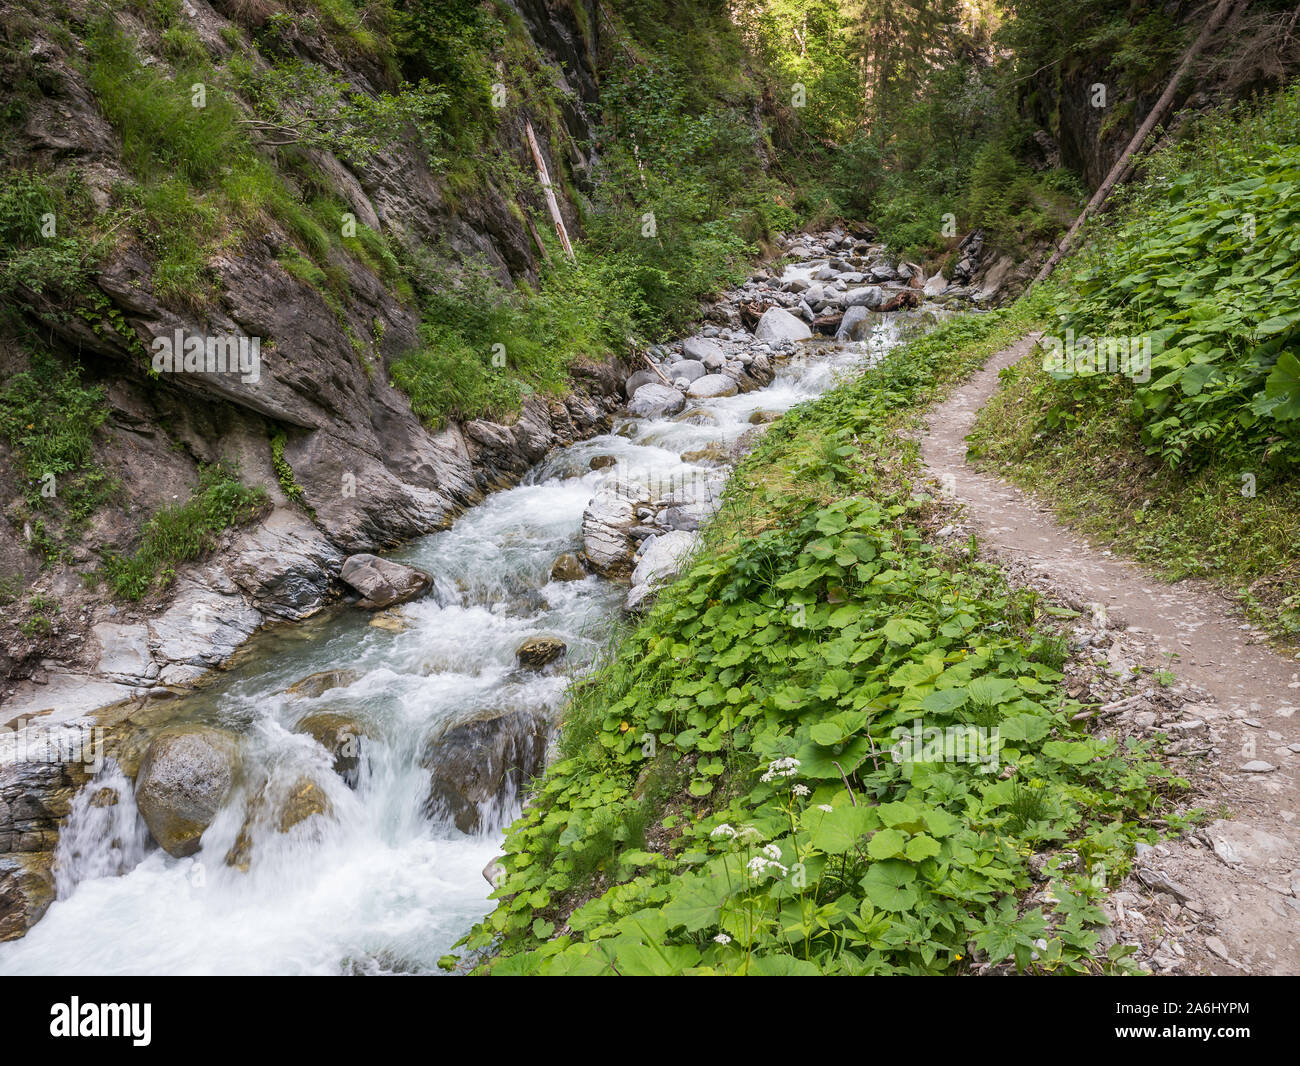 View of the Radurschl Canyon, location of a famous hiking trail in Pfunds, Tyrol, Austria Stock Photo